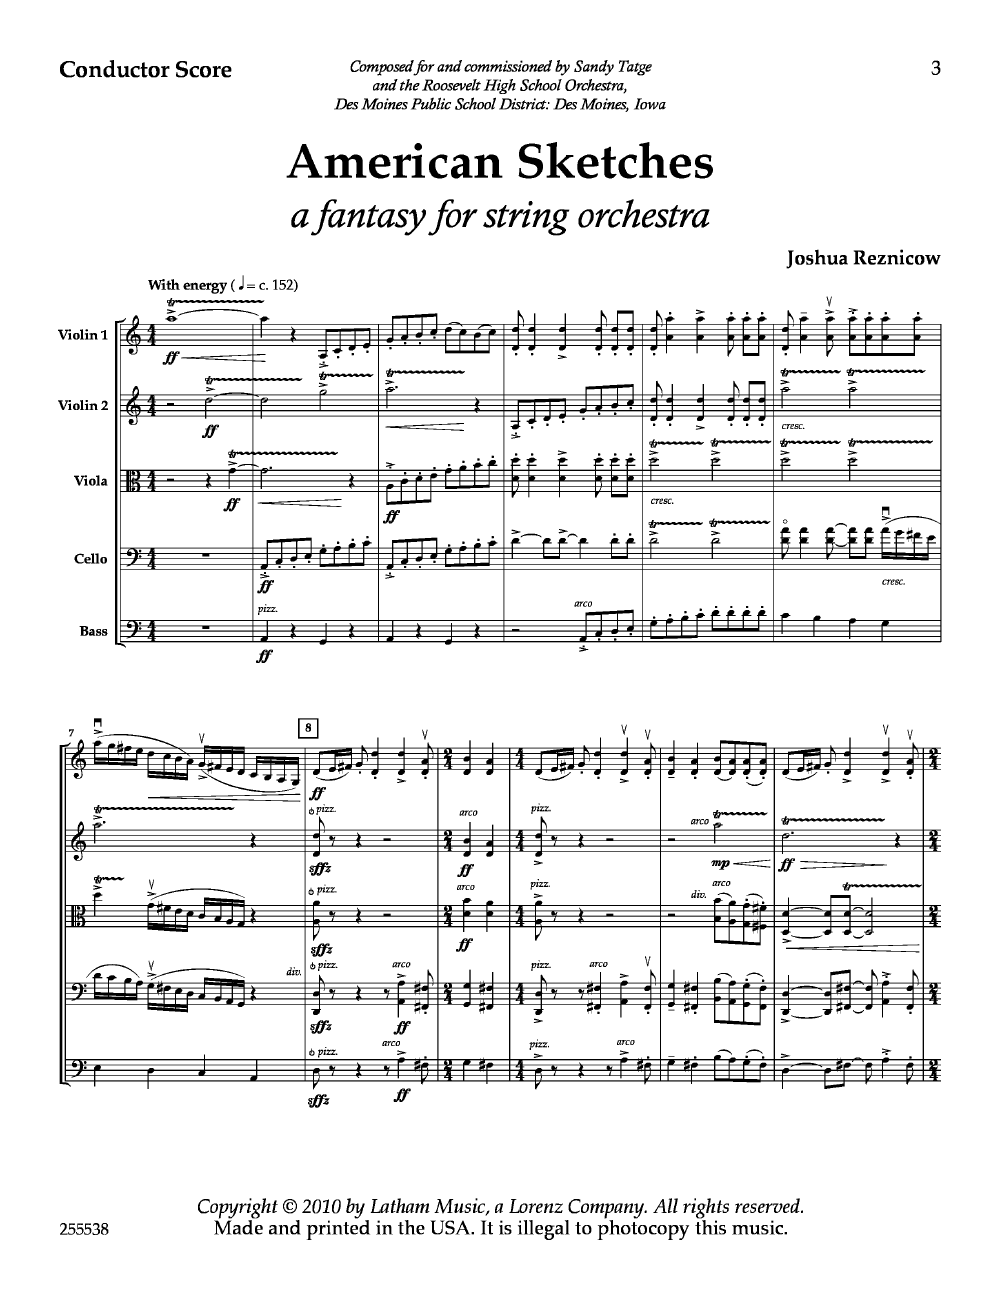 AMERICAN SKETCHES  FANTASY FOR STRING ORCHESTRA SCORE